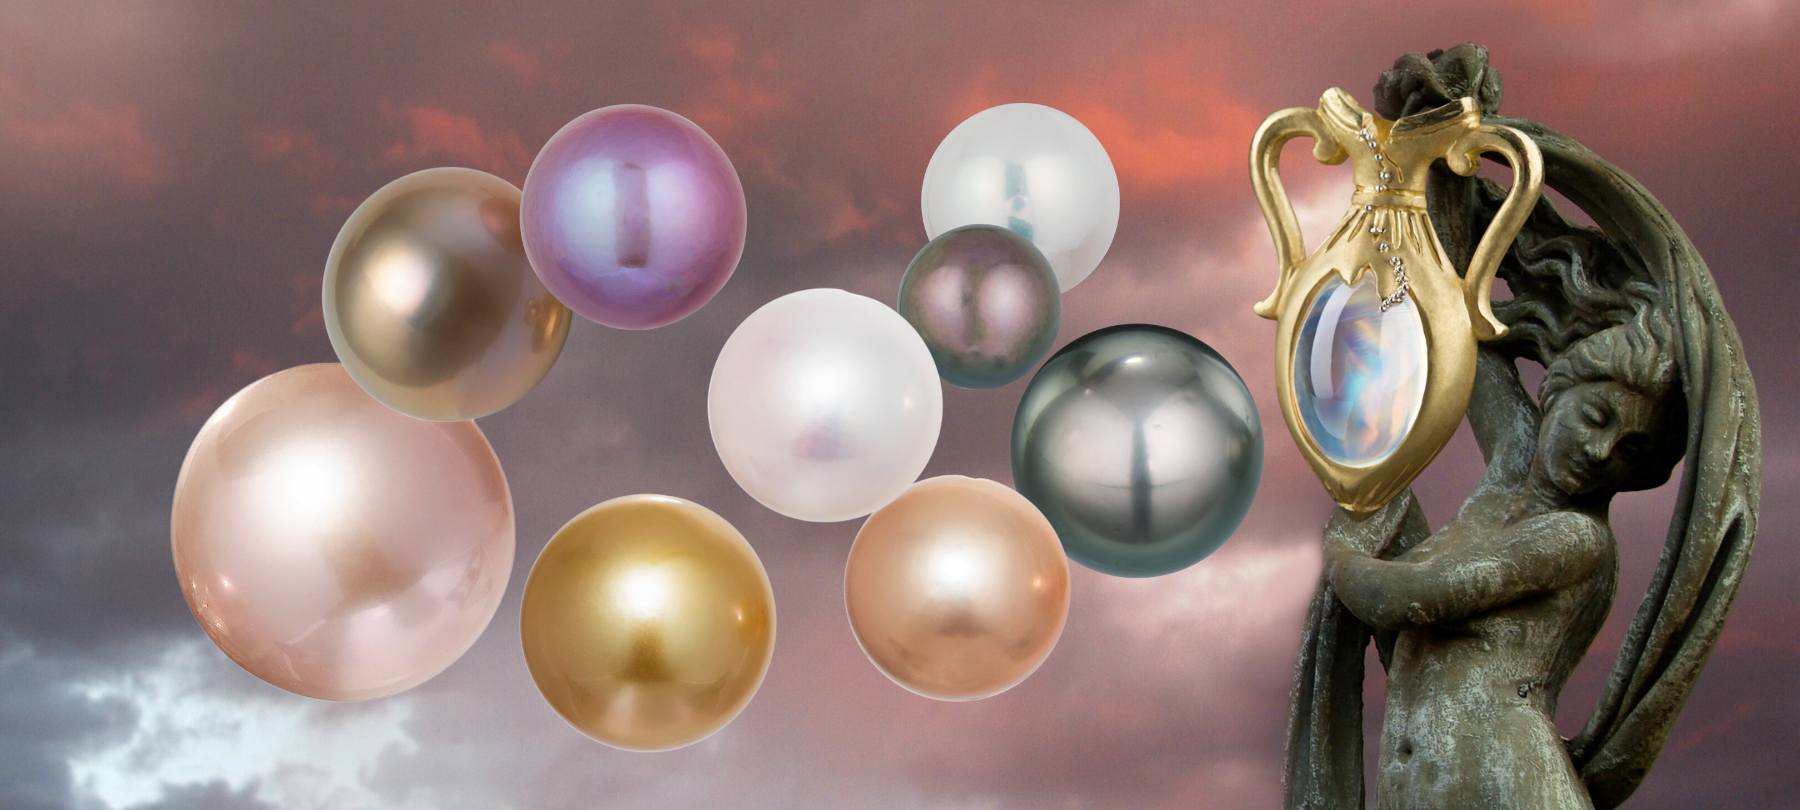 Image of various loose pearls floating and one moonstone pendant on pink background